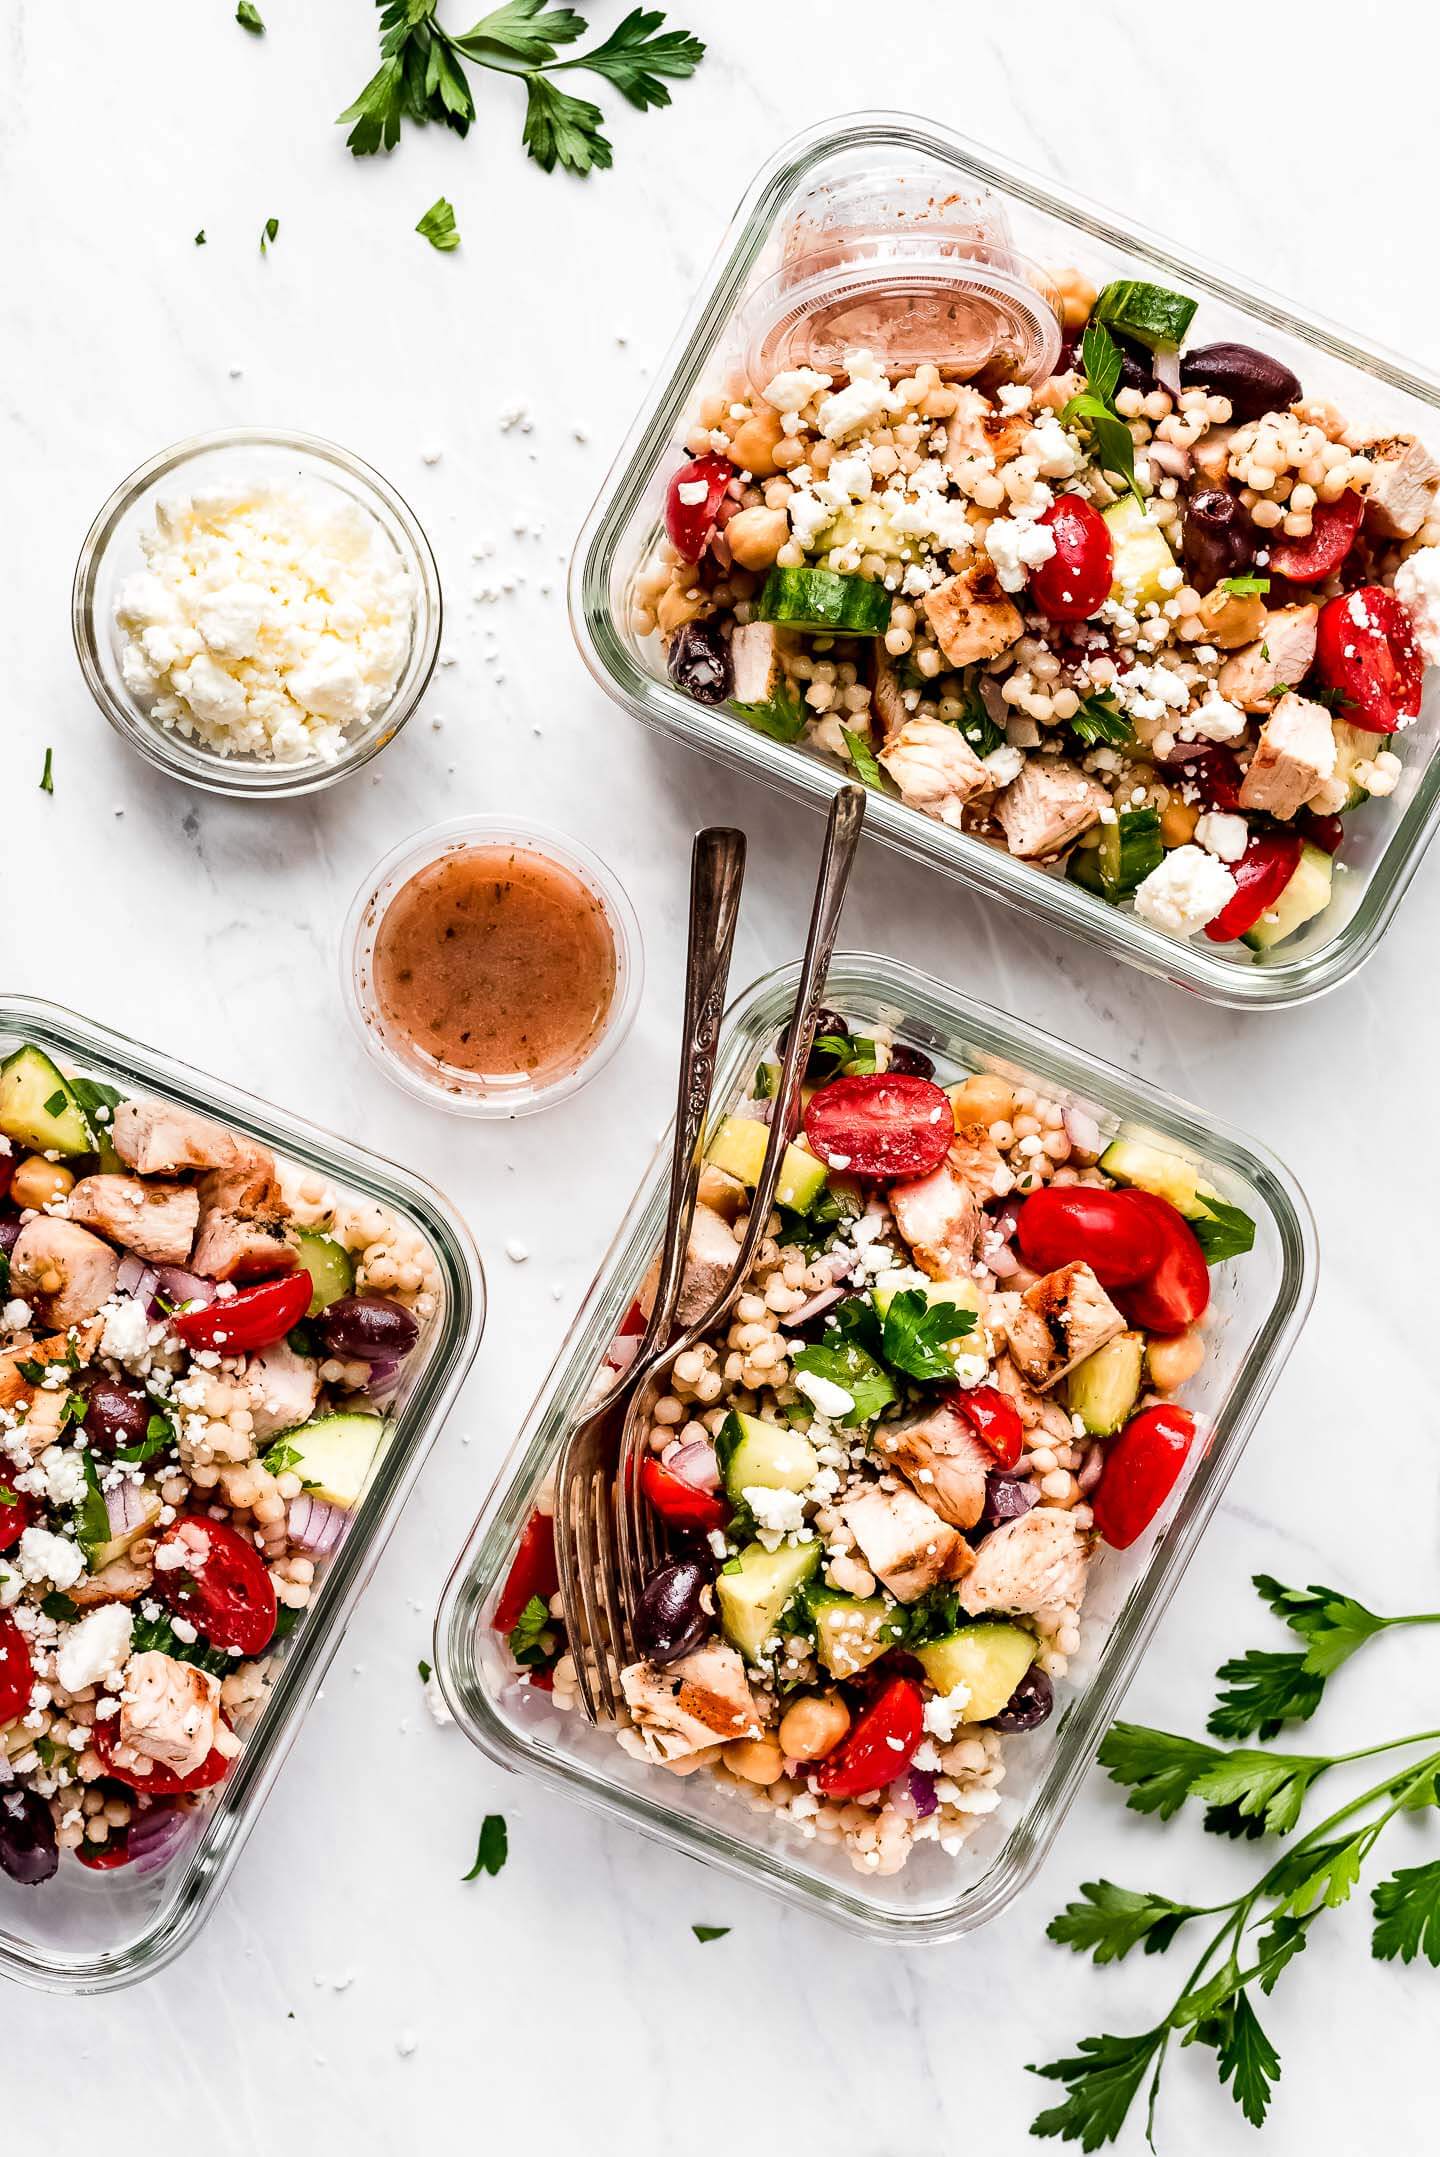 Three glass meal prep containers of Mediterranean Couscous Salad, small containers of dressing, a bowl of feta cheese.